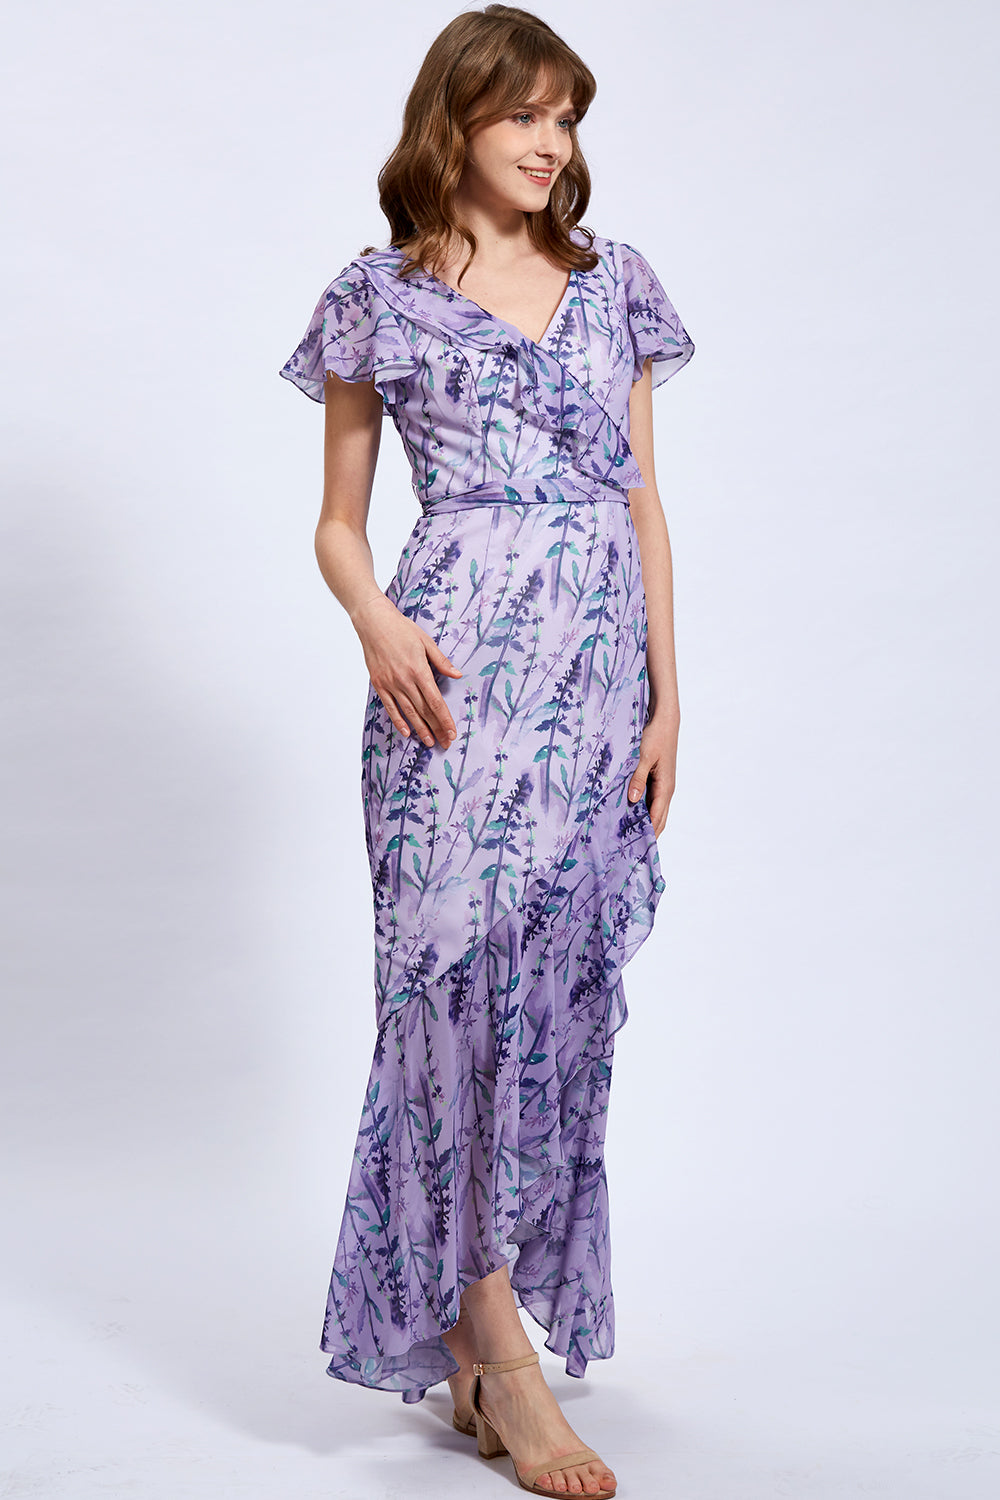 Cape Sleeves Chiffon Print Floral Wisteria Floor Length Formal Evening Gown